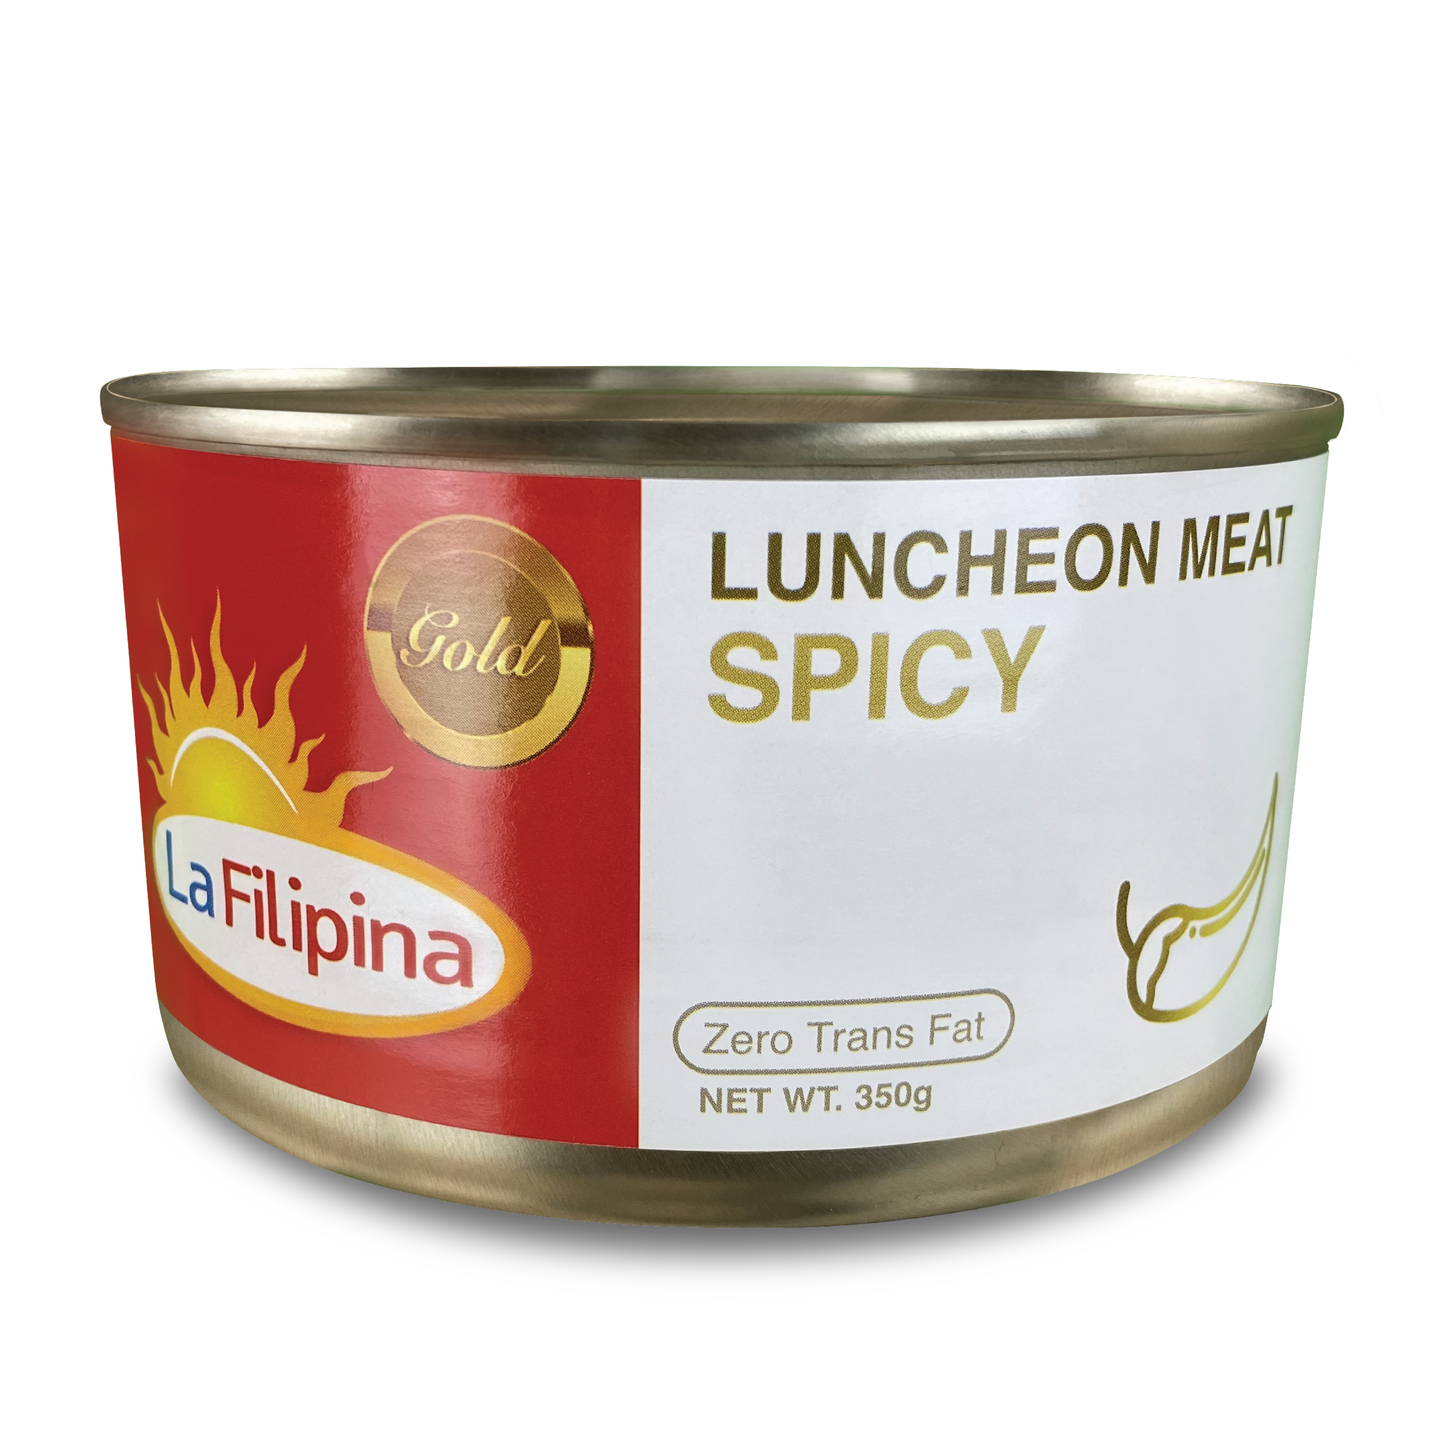 La Filipina Luncheon Meat Gold Spicy 350g